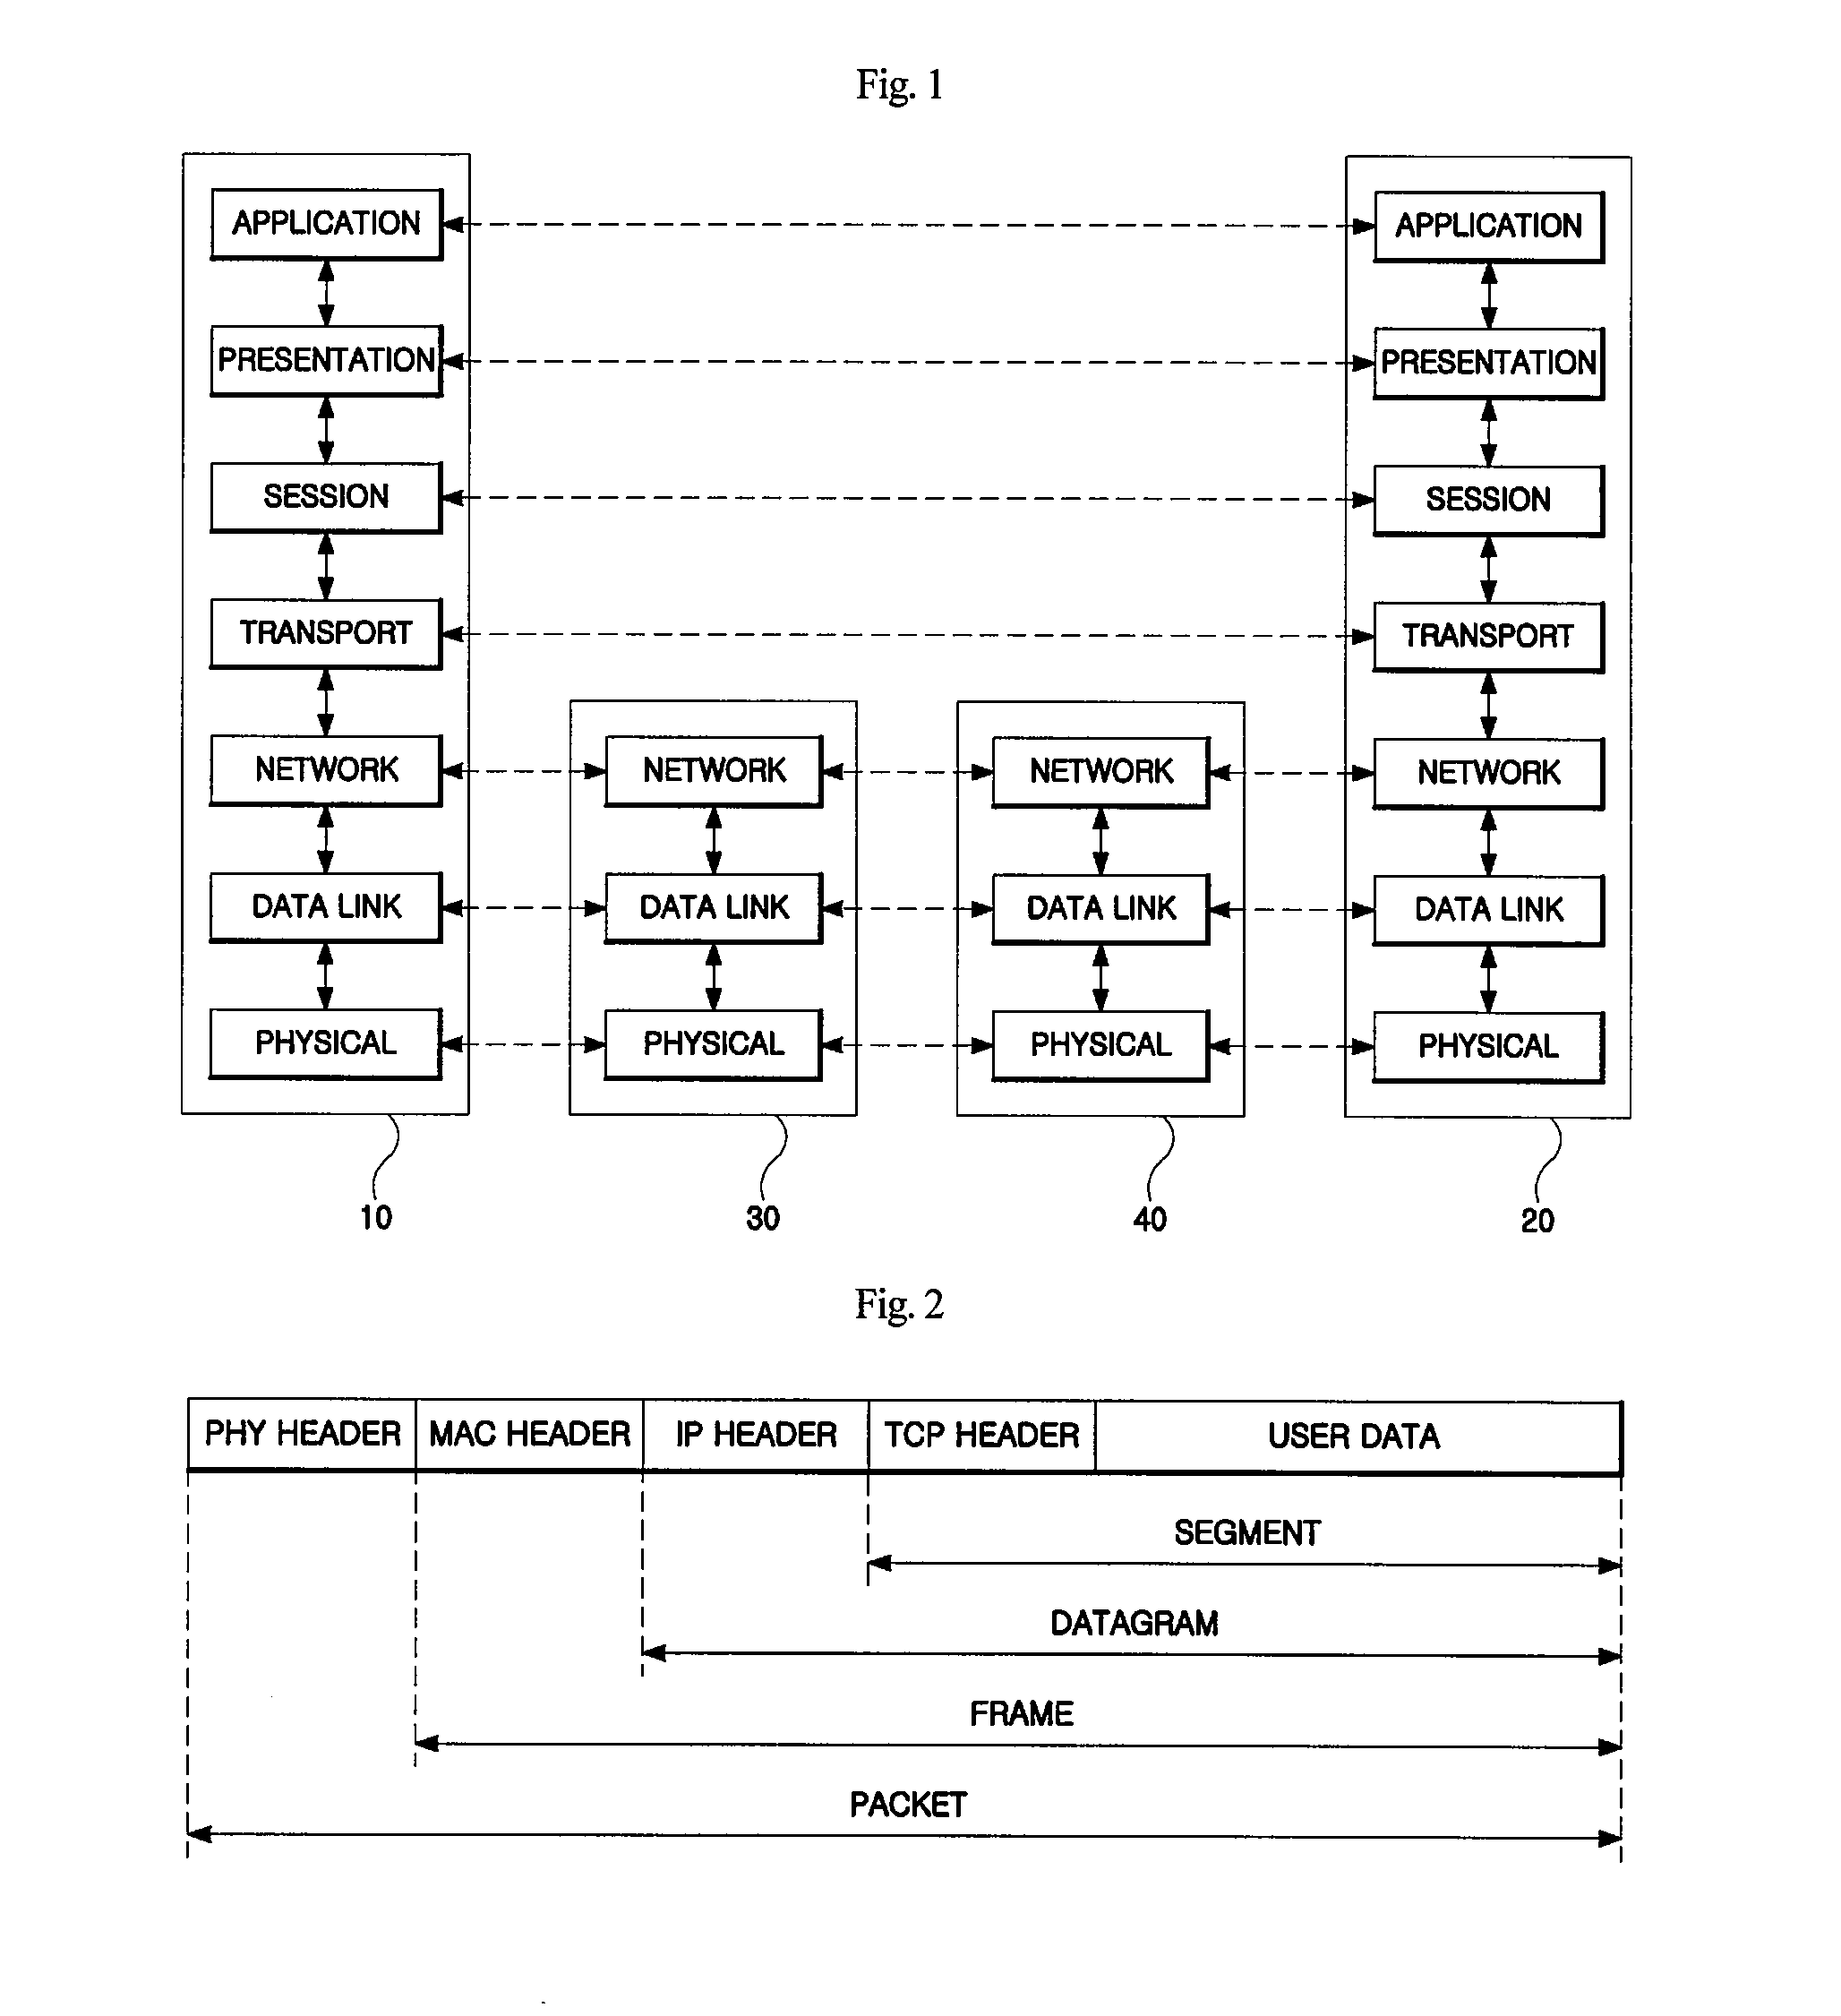 Dual processing system capable of ensuring real-time processing in protocol conformance test